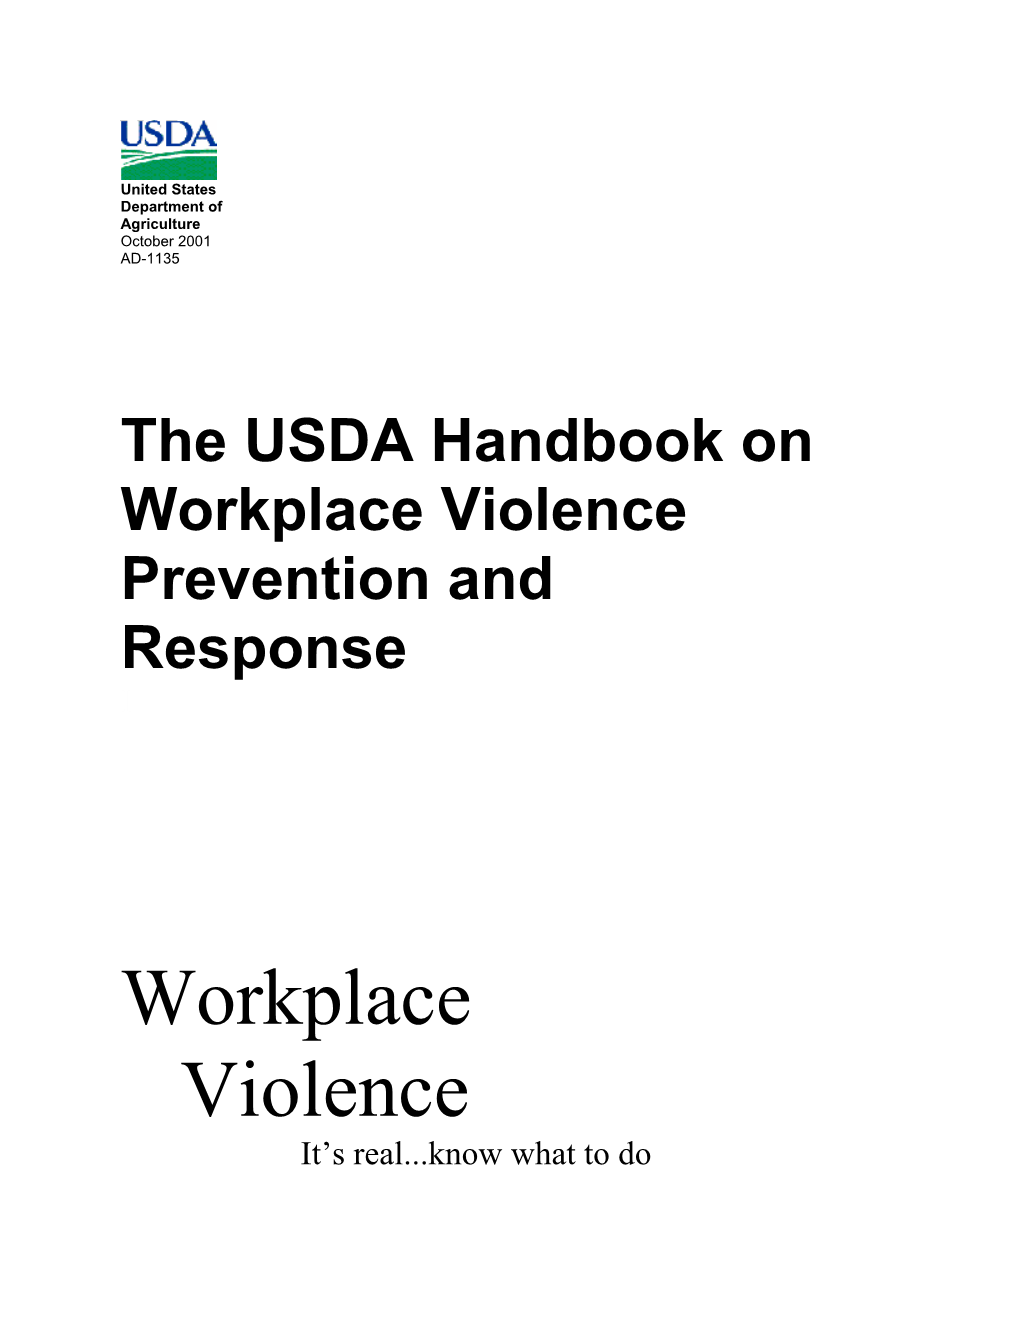 USDA Handbook on Workplace Violence Prevention and Response I